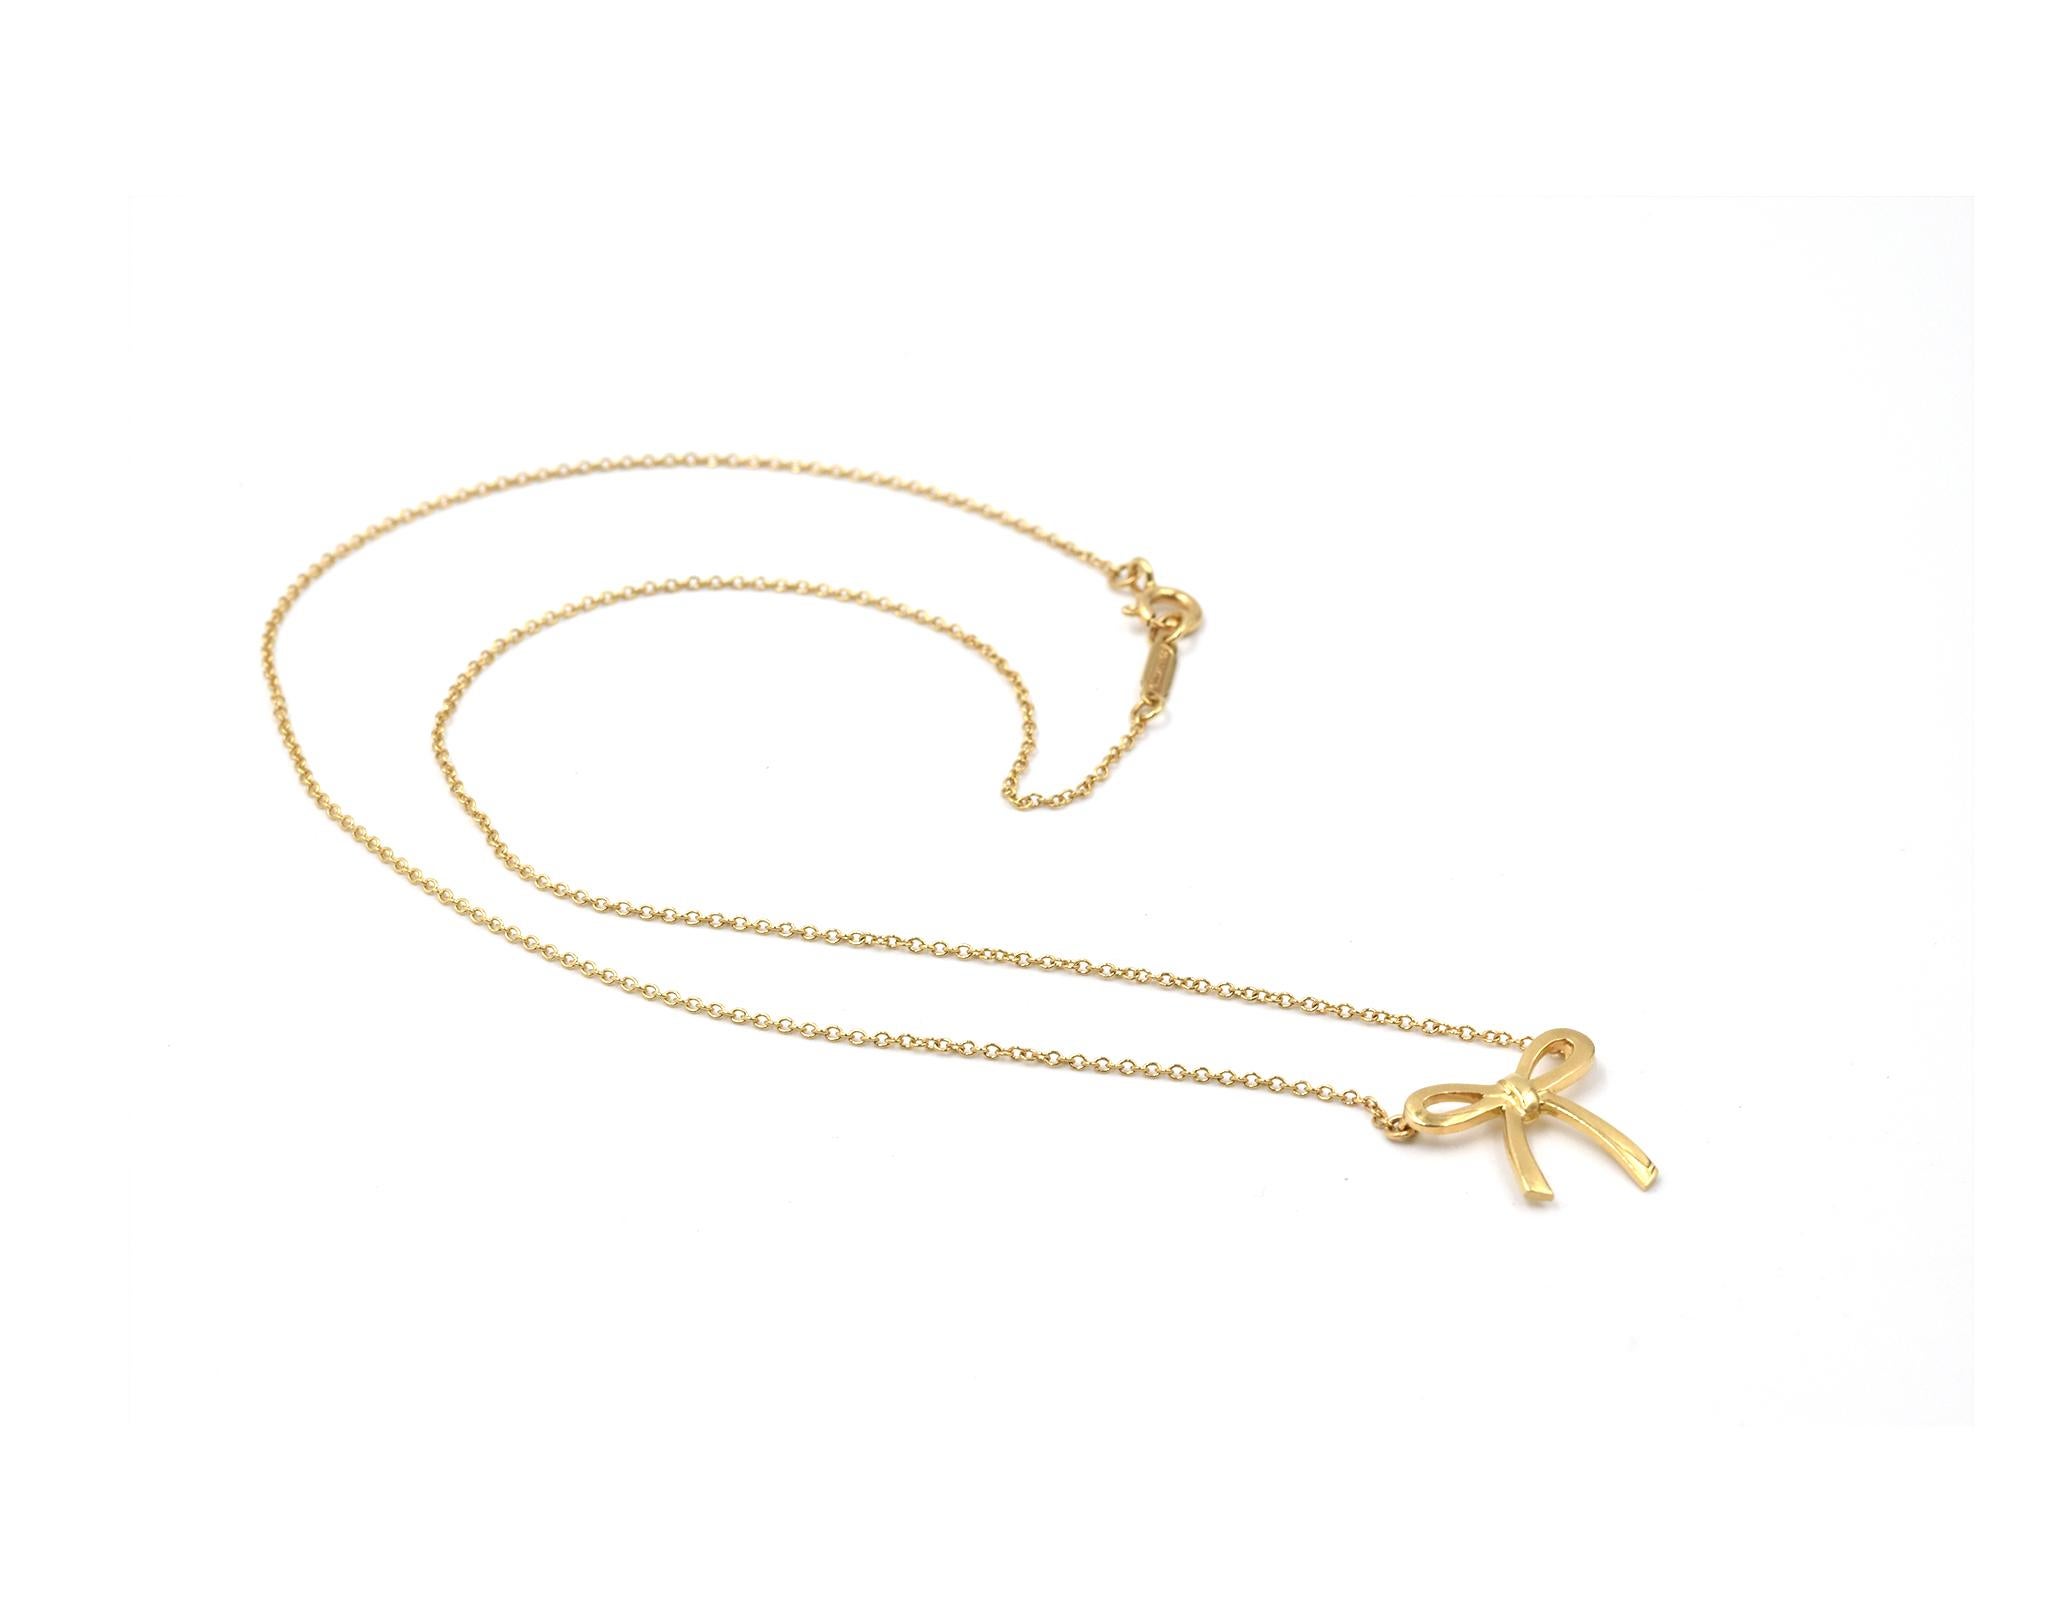 Designer: Tiffany & Co
Hallmarks: T & CO
Material: 18k yellow gold
Dimensions: necklace is 17-inch long, pendant is 1/2-inch long and 1/2-inch wide
Weight: 2.52 grams
Retail: $975
